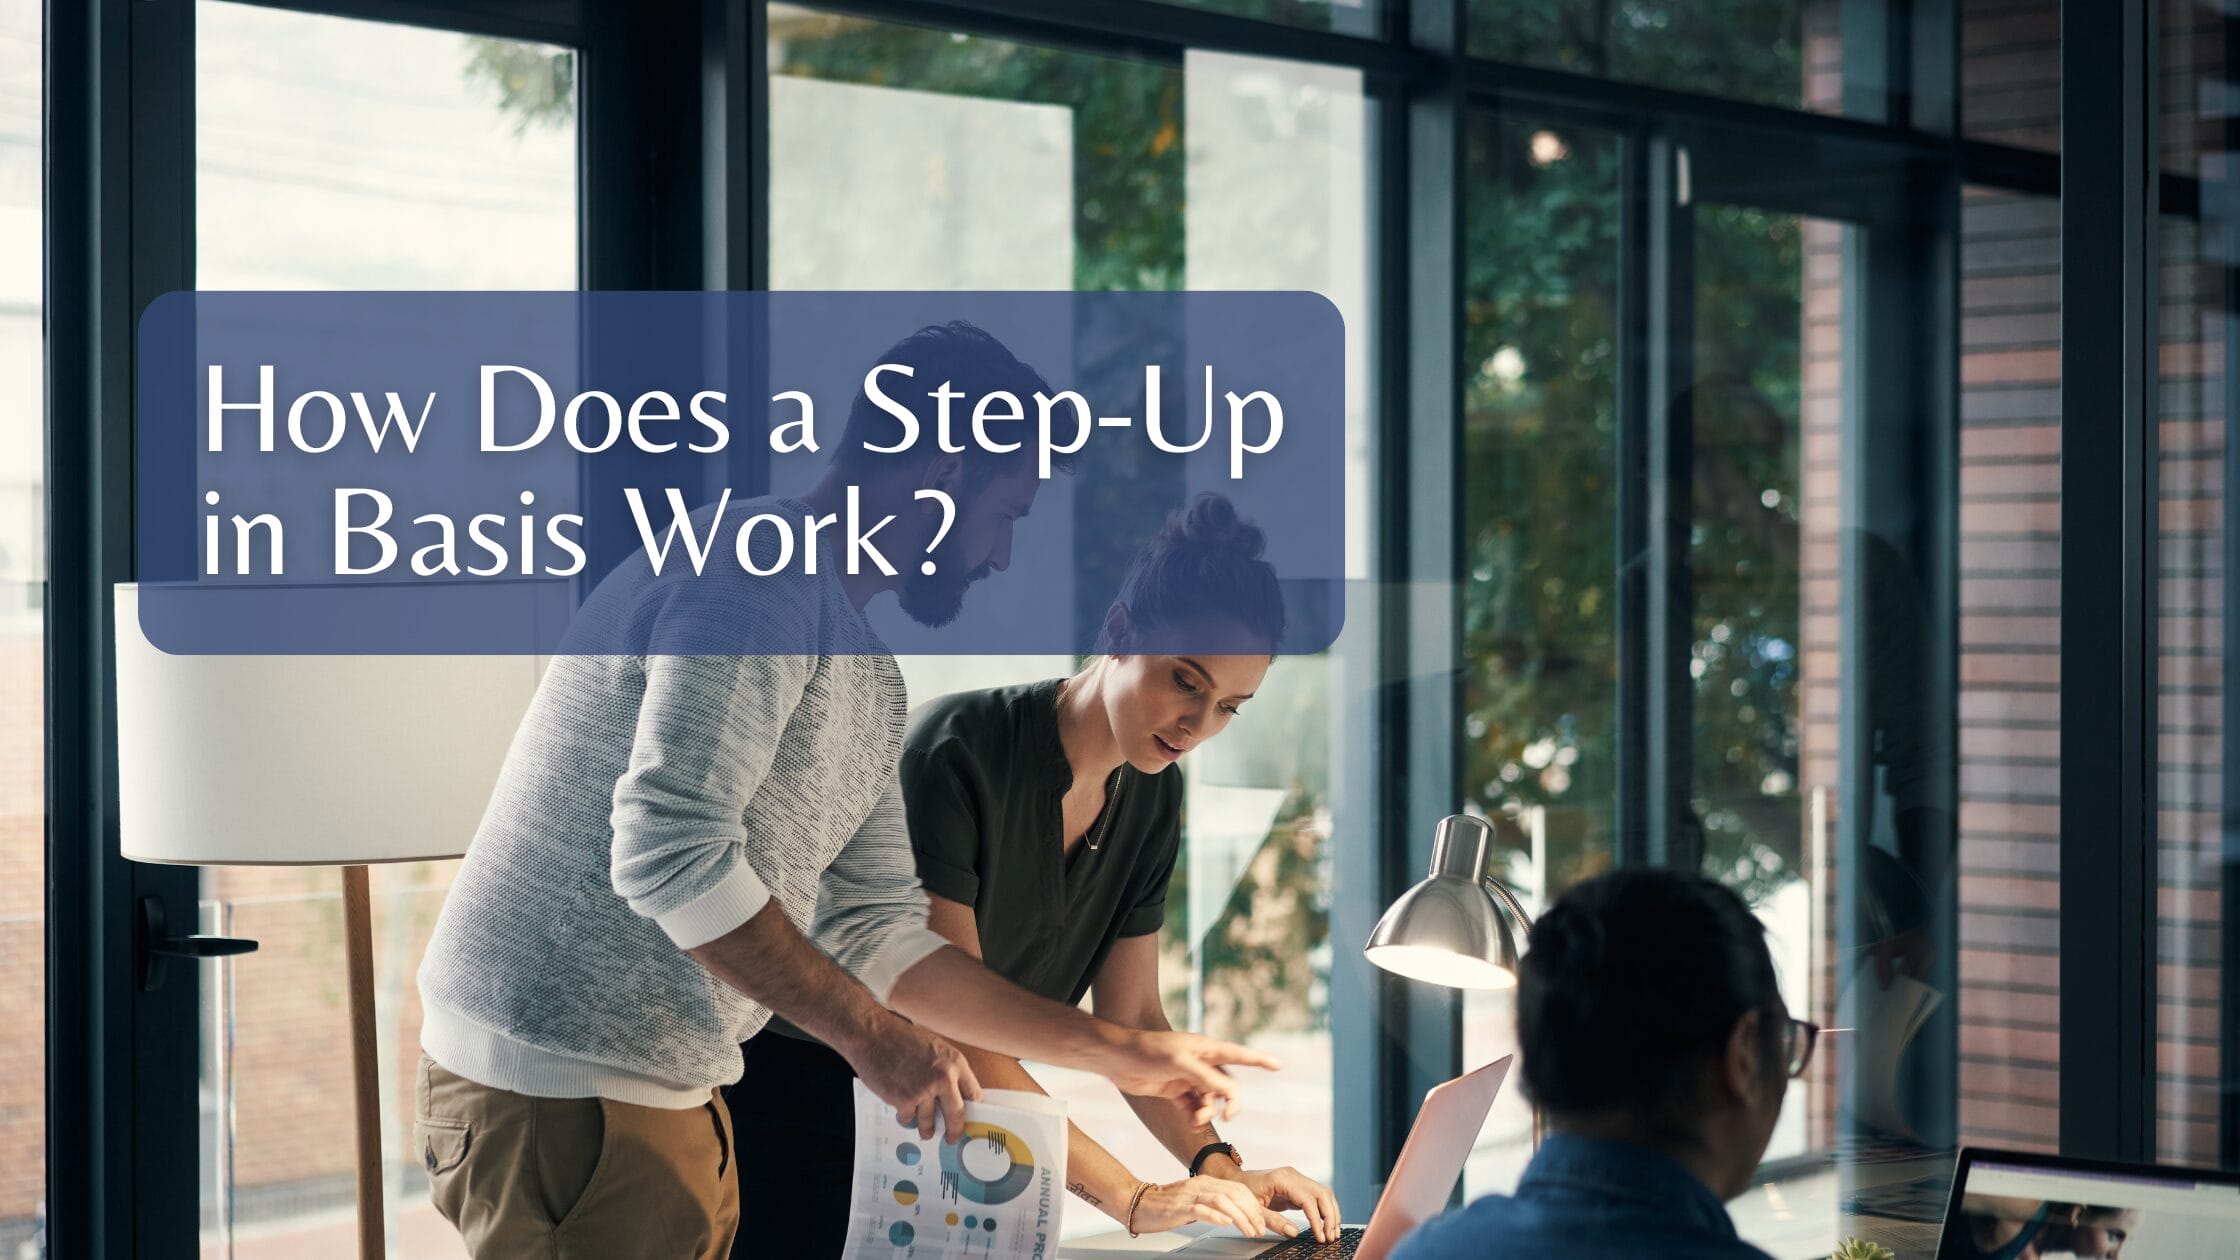 How Does a Step-Up in Basis Work?